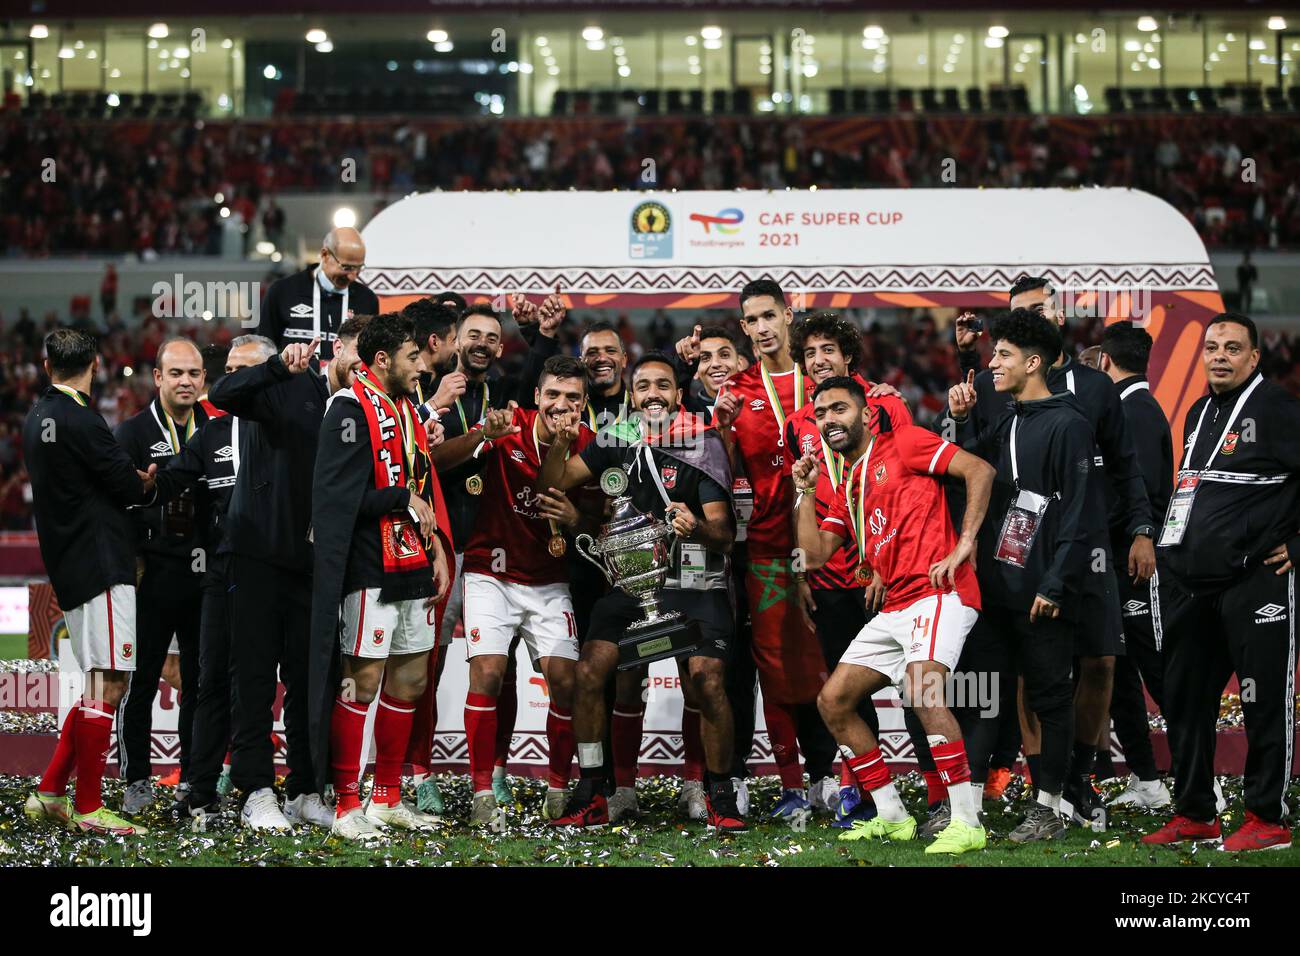 (7) Kahraba of Al Ahly team lifts the Super Cup trophy following victory the CAF Super Cup Final between Al Ahly and Raja Casablanca at Al Rayyan Stadium in Al Rayyan, Qatar on 22 December 2021. (Photo by Ayman Aref/NurPhoto) Stock Photo